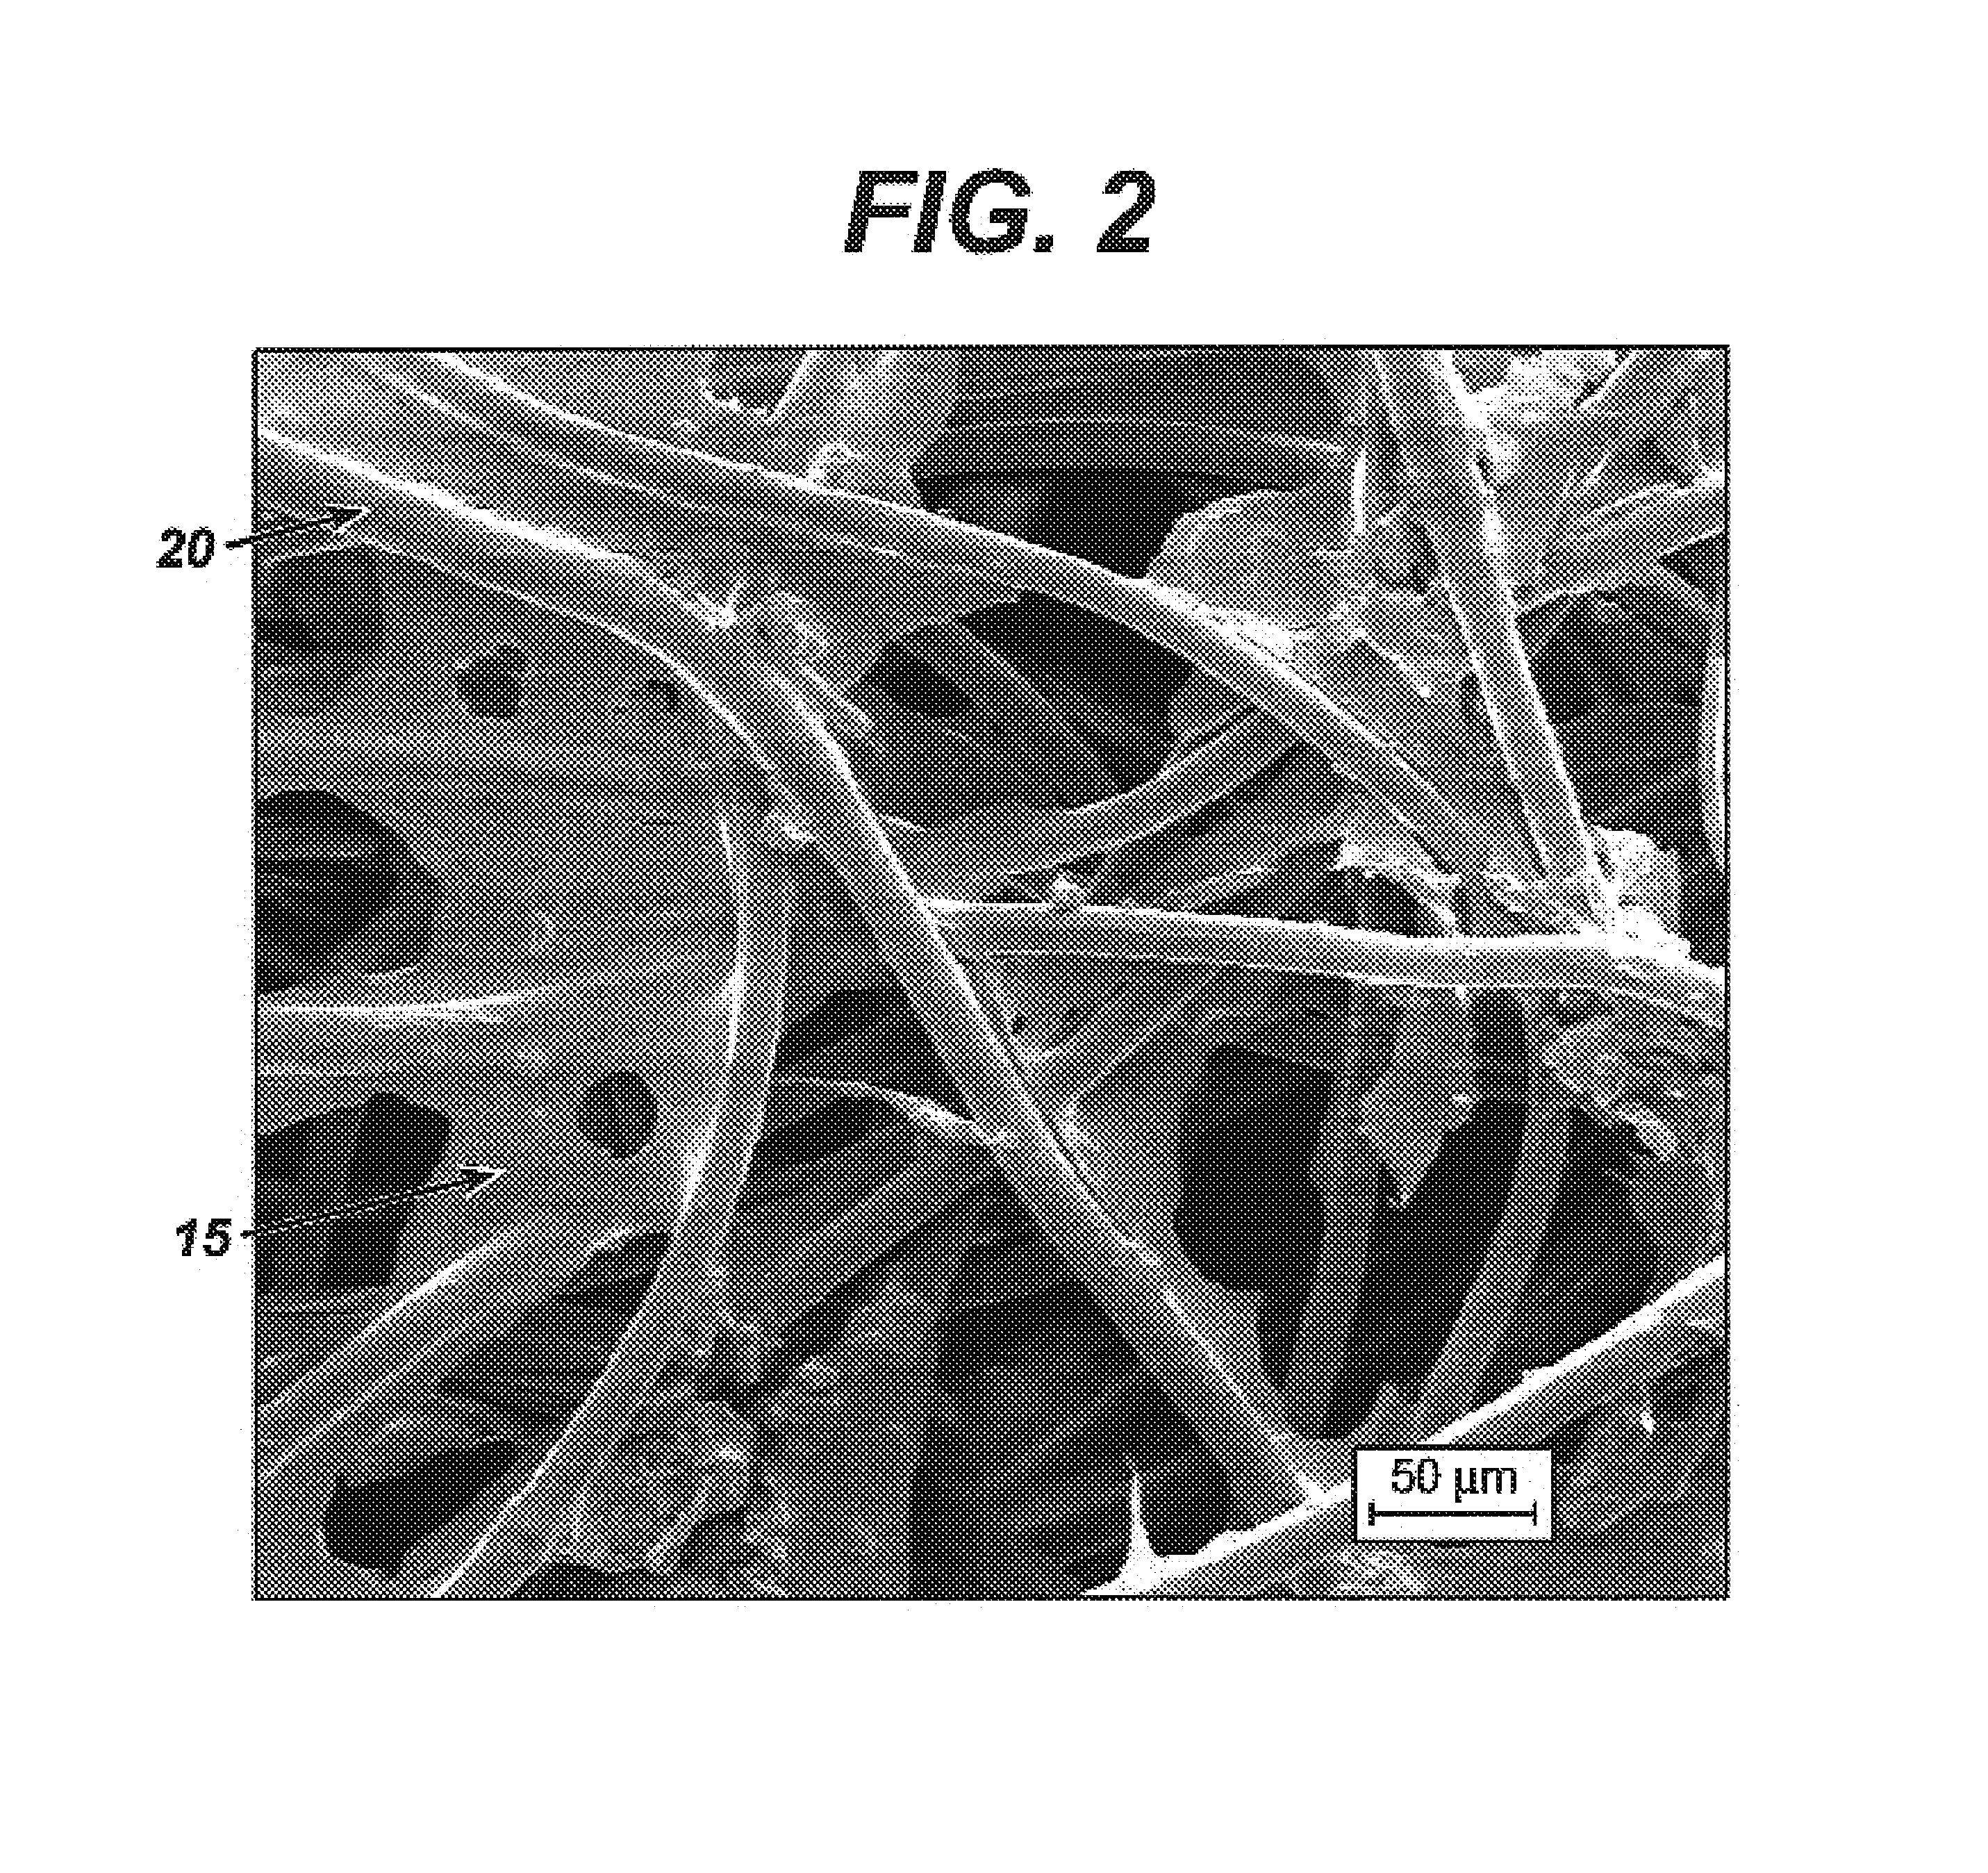 Modified hyaluronic acid for use in musculoskeletal tissue repair